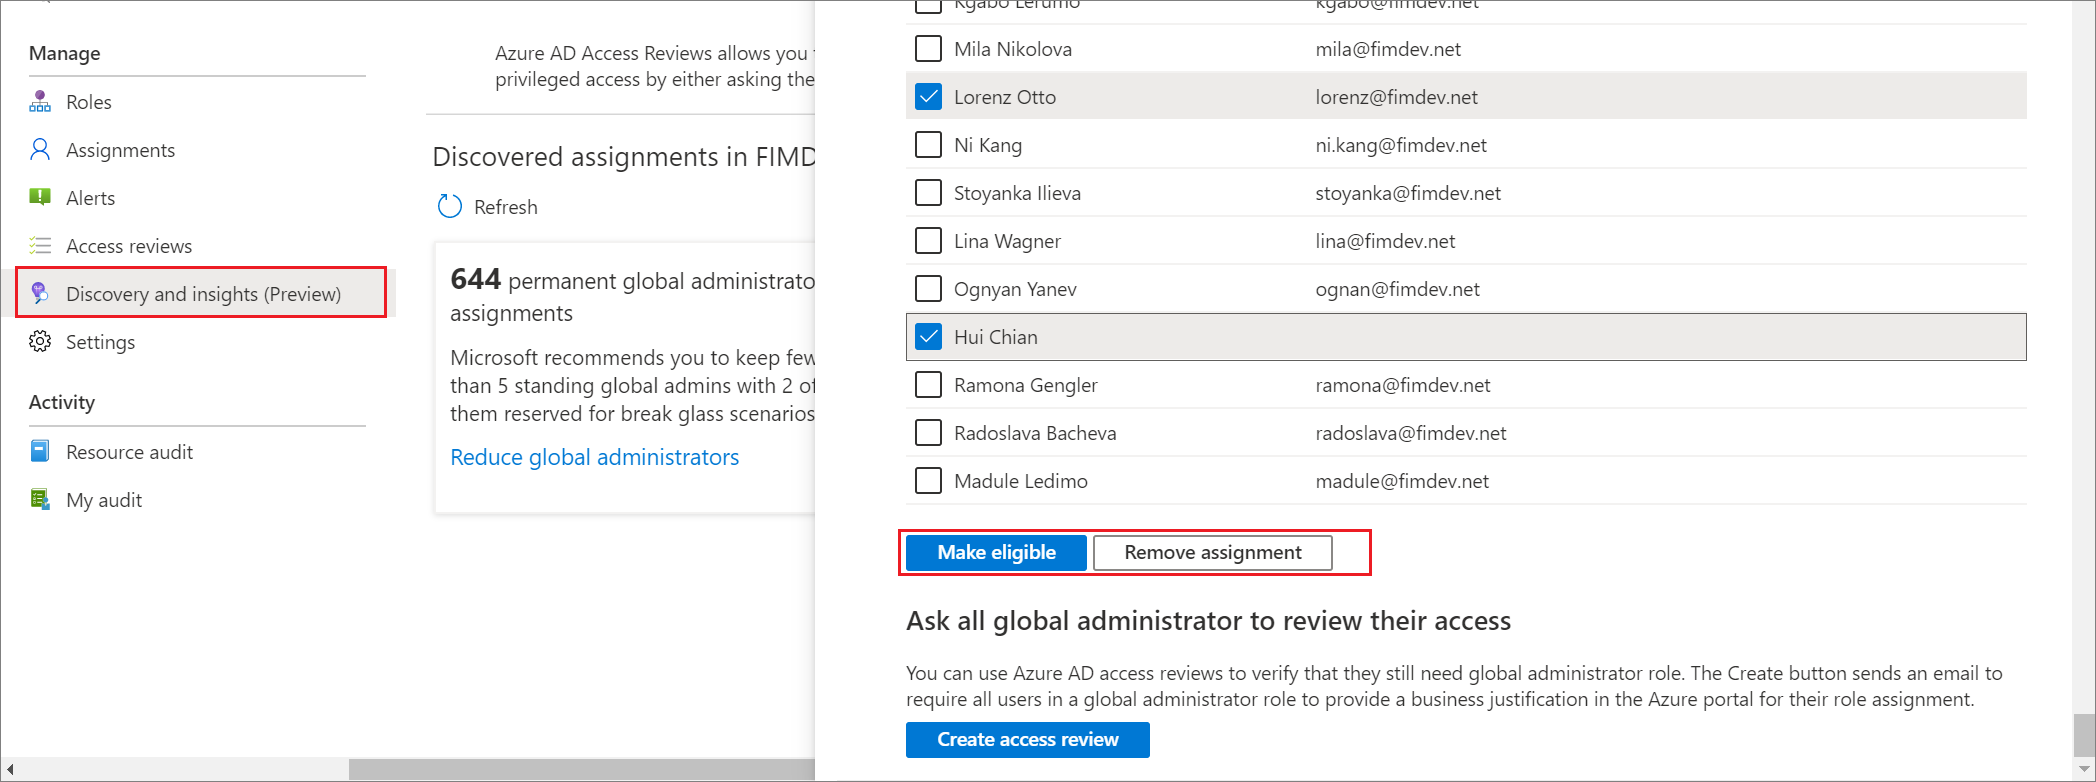 Convert members to eligible page with options to select members you want to make eligible for roles